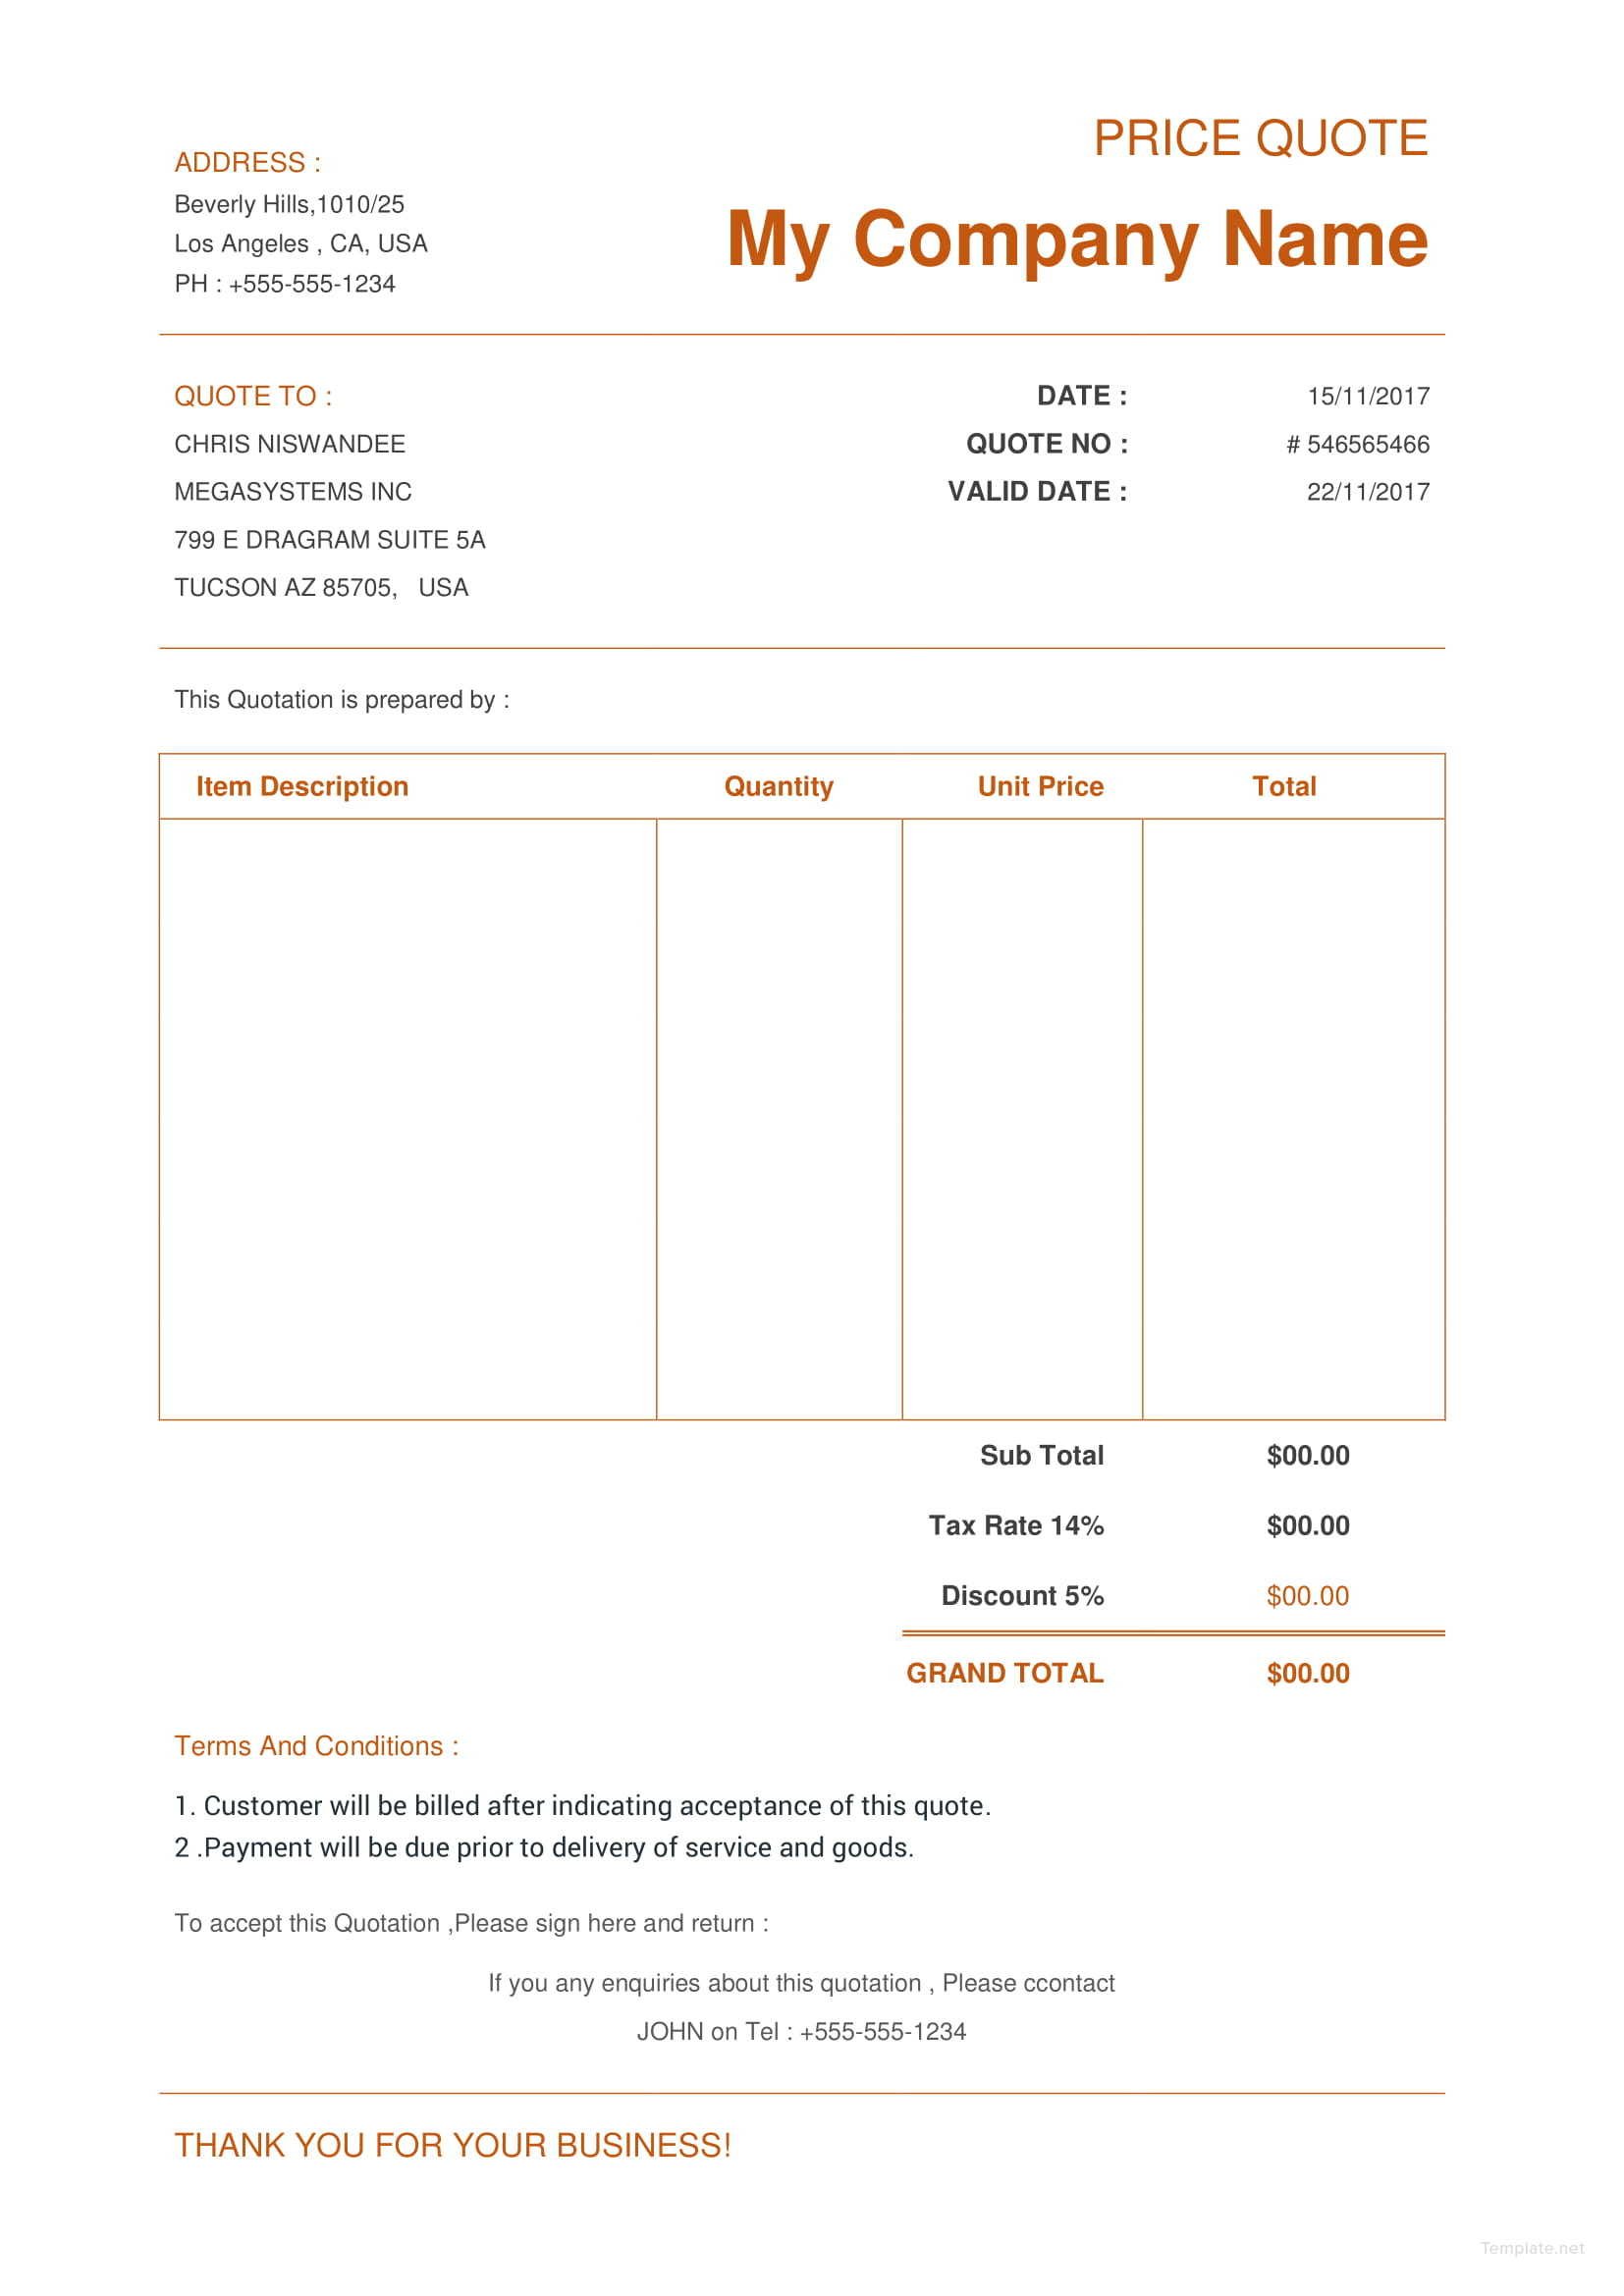 Ecommerce Website Quotation Template in Microsoft Word Excel PDF